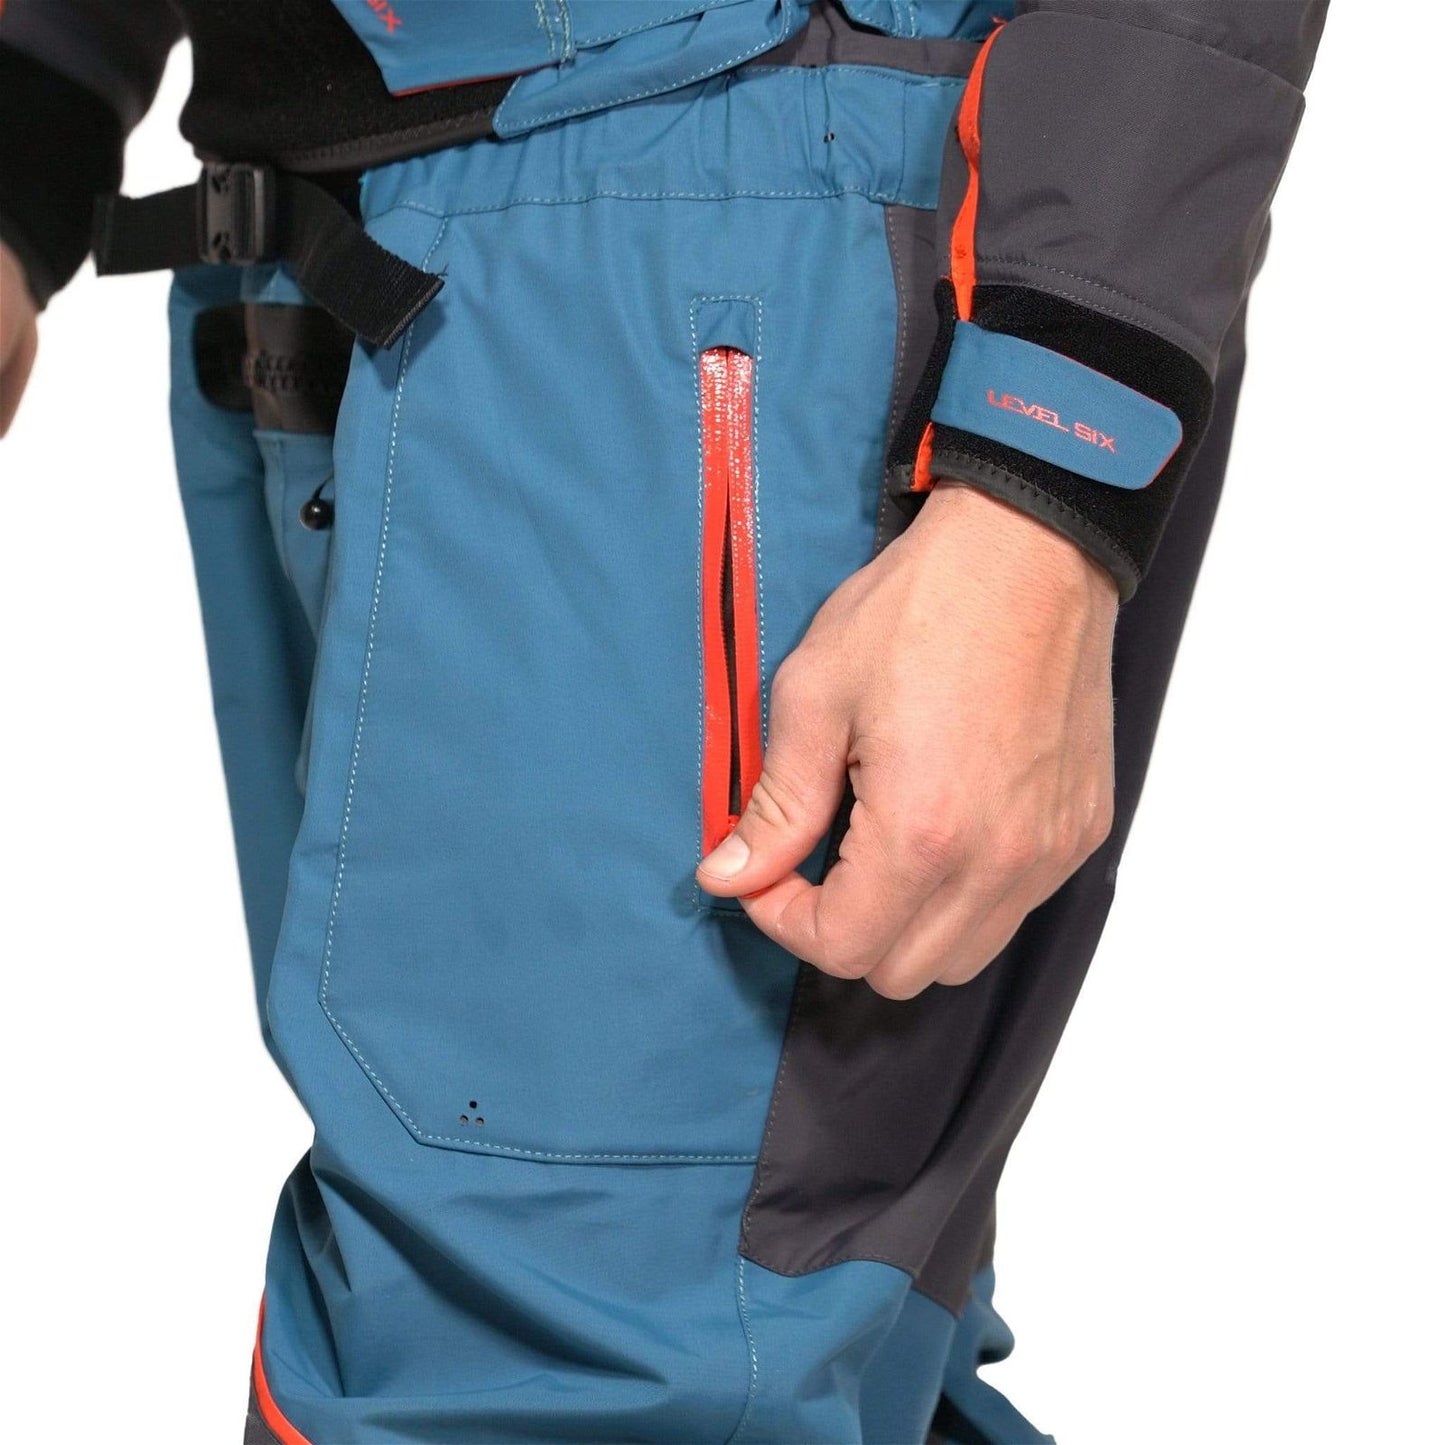   Odin Dry Suit  BestCoast Outfitters 